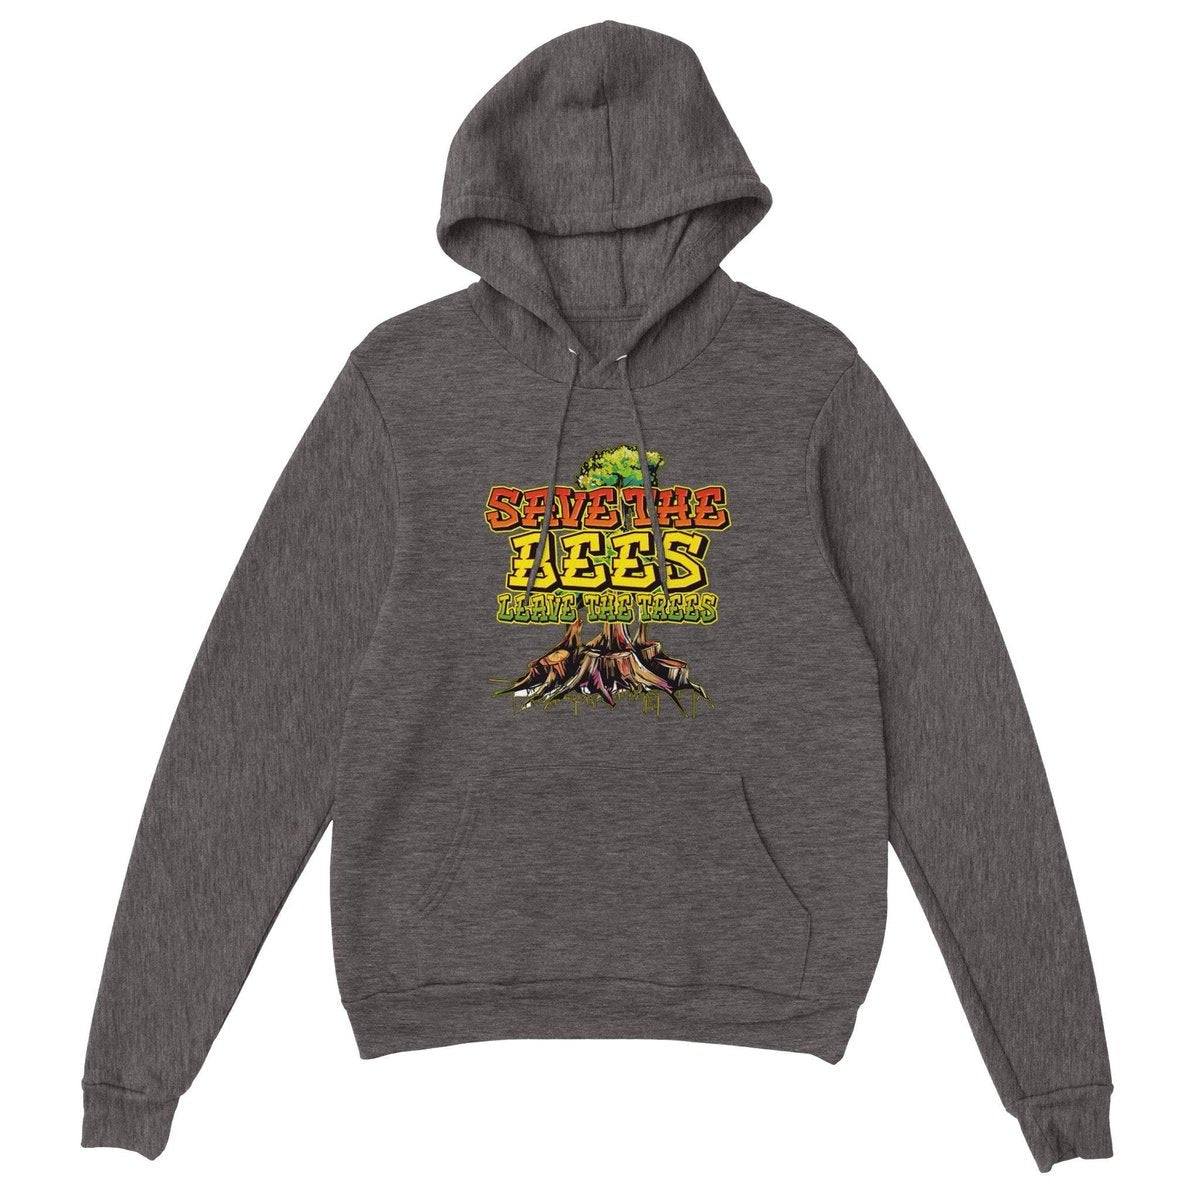 Save The Bees Hoodie - Leave The Trees - Stumps - Premium Unisex Pullover Hoodie Australia Online Color Charcoal Heather / XS